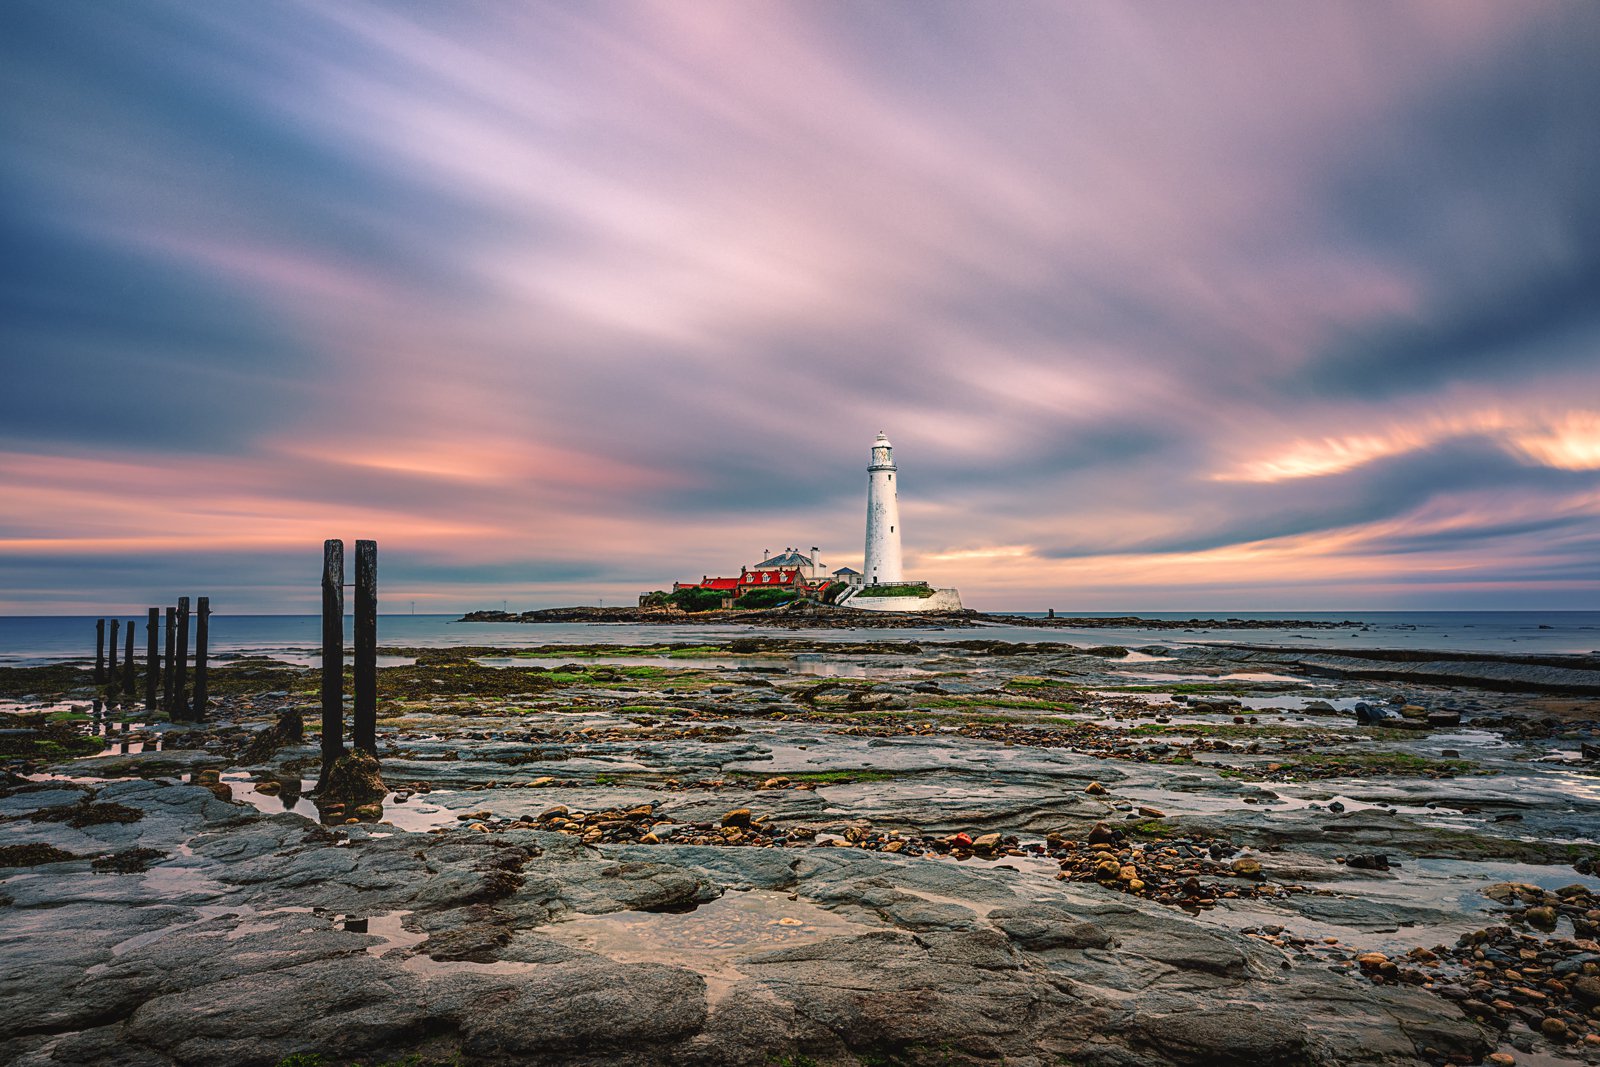 Low tide. Saint Mary's Lighthouse, Whitley Bay, UK